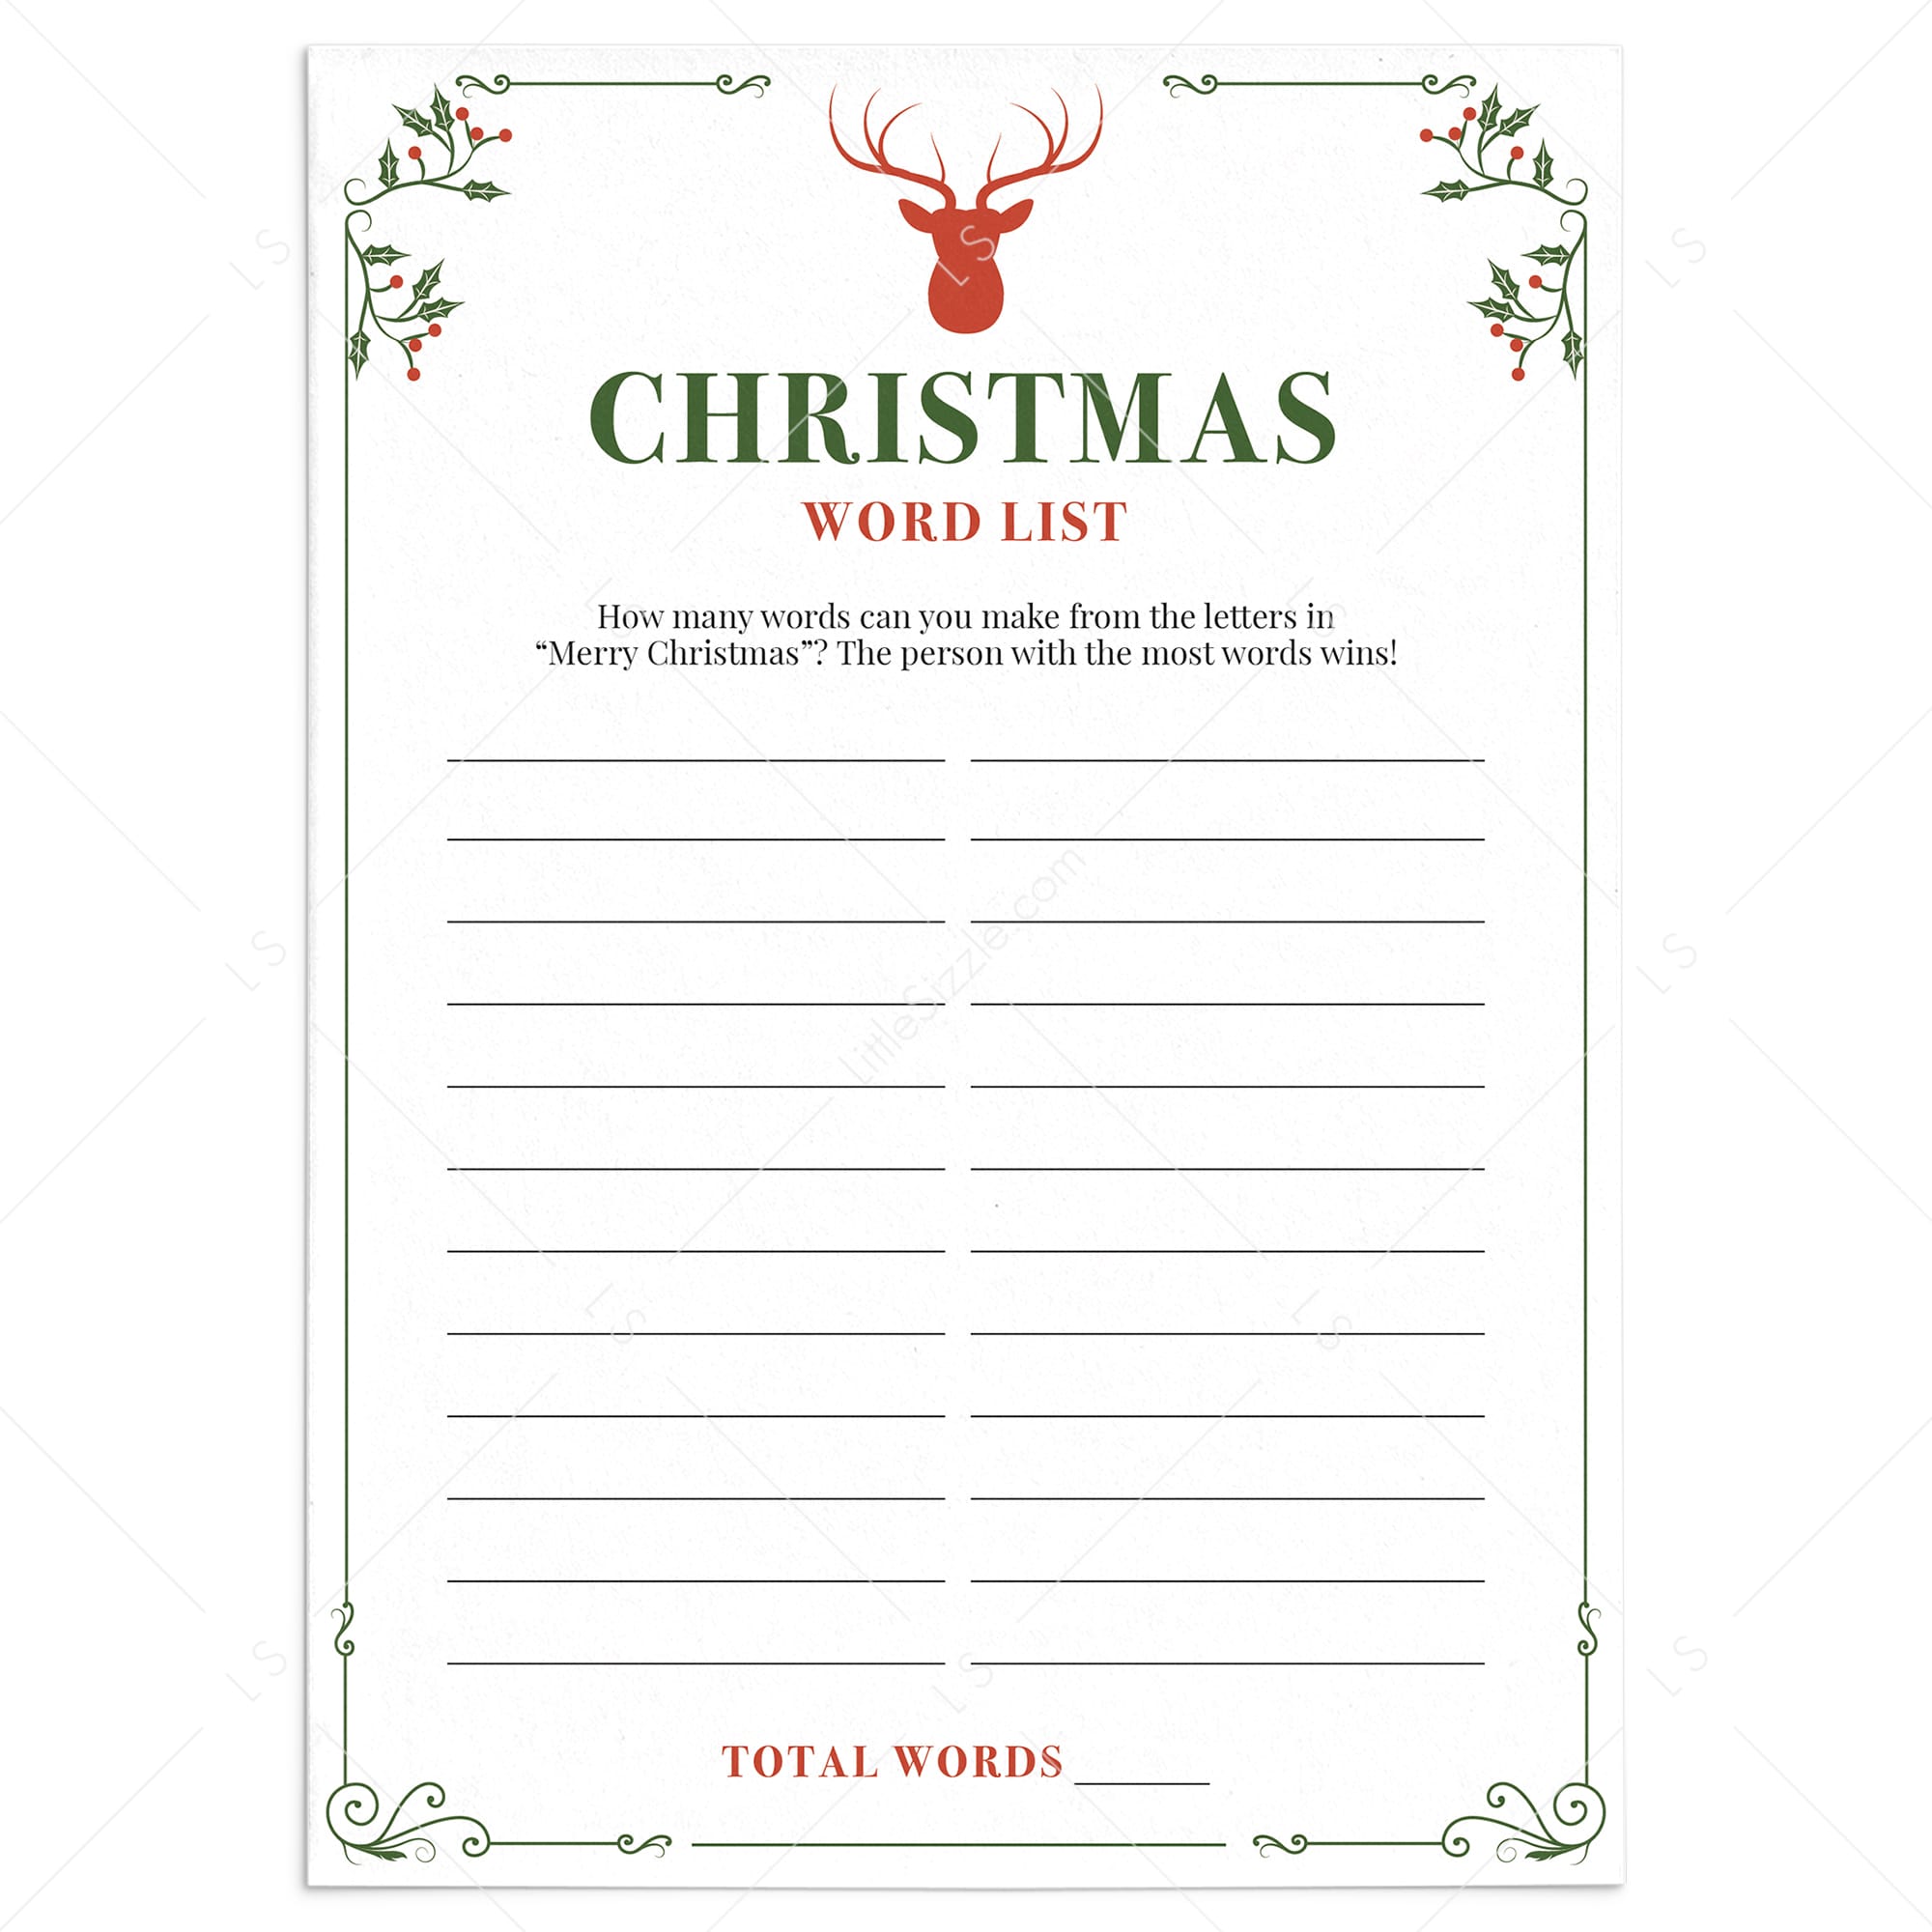 Christmas Word List Sheet Printable by LittleSizzle